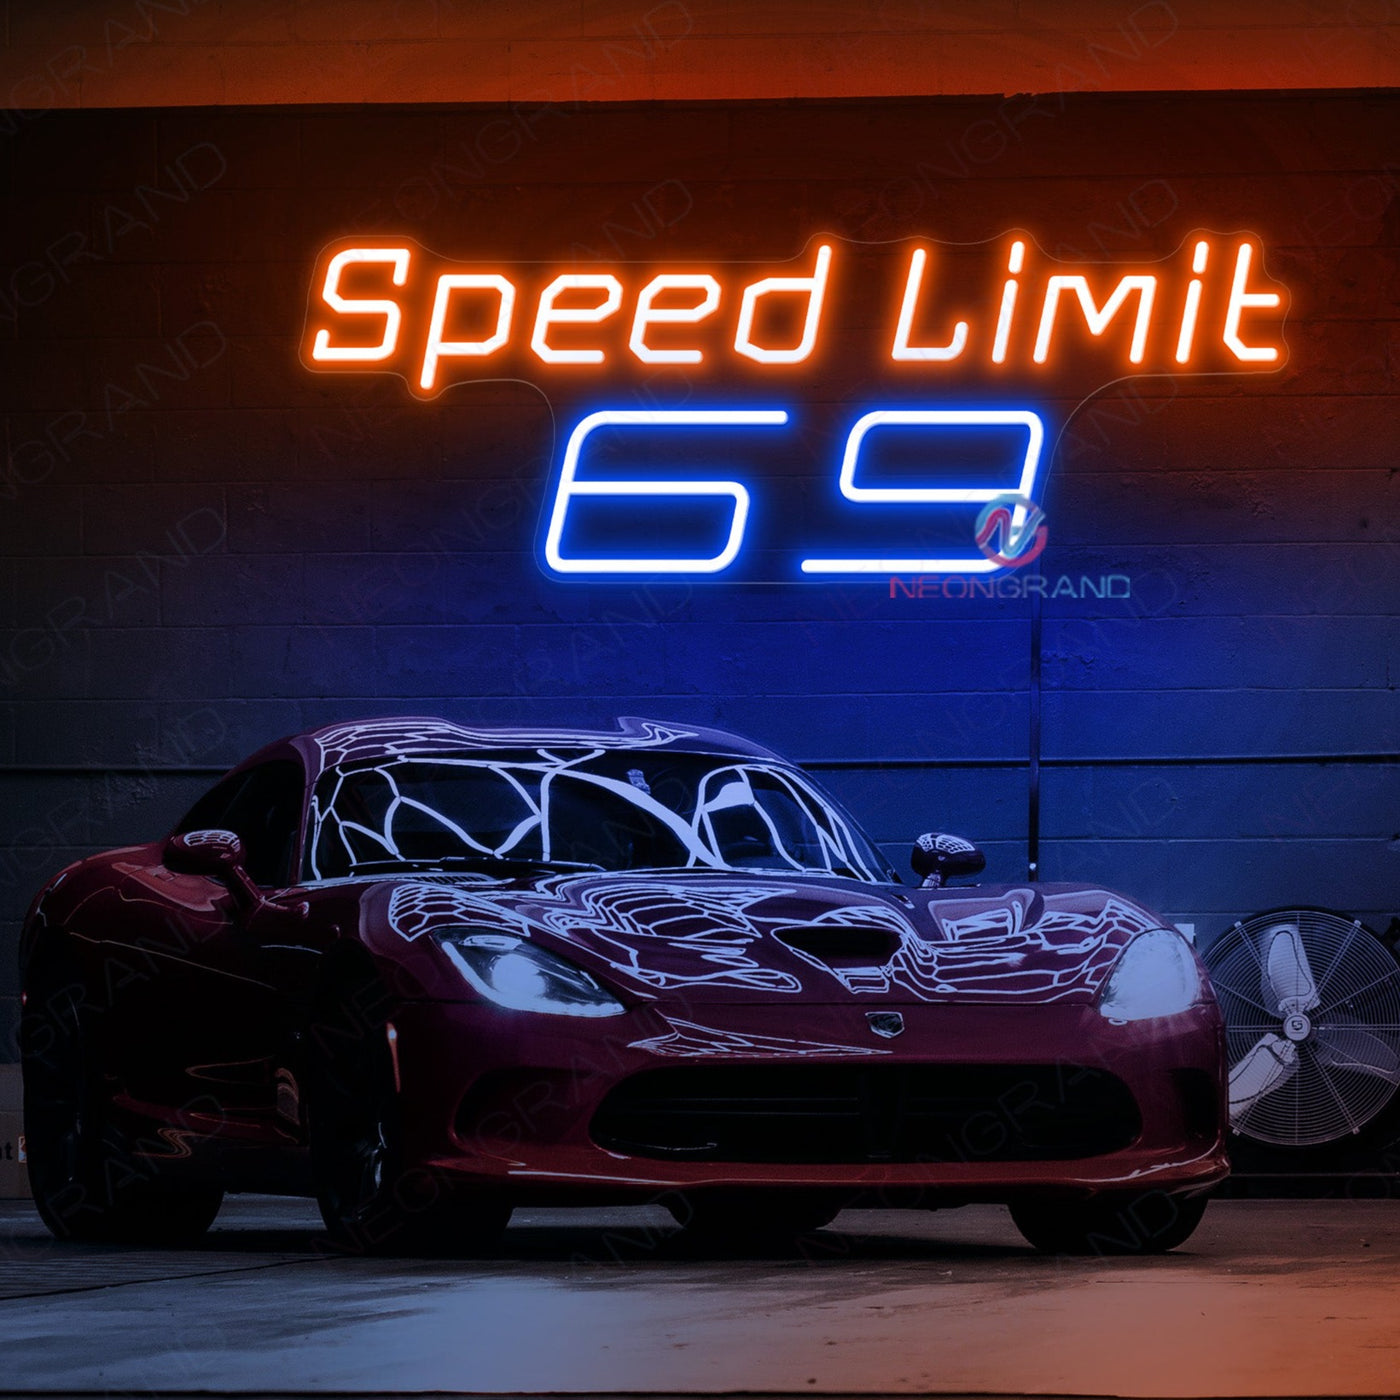 Speed Limit 69 Neon Sign Man Cave Led Light